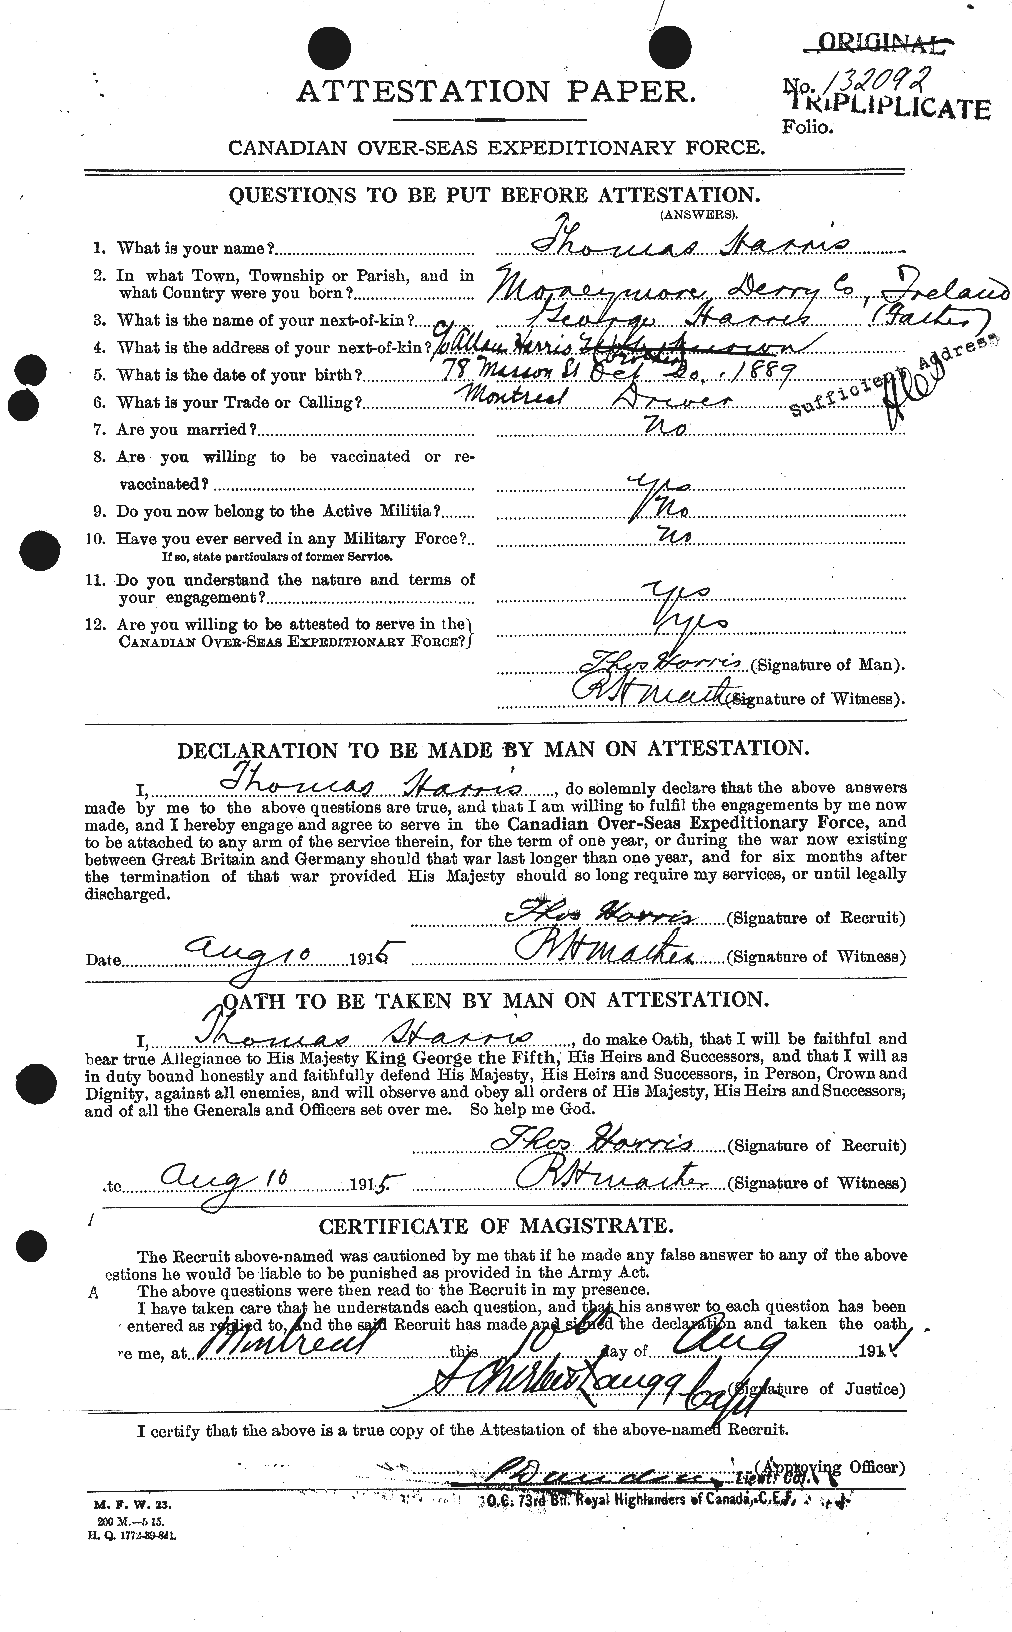 Personnel Records of the First World War - CEF 378238a